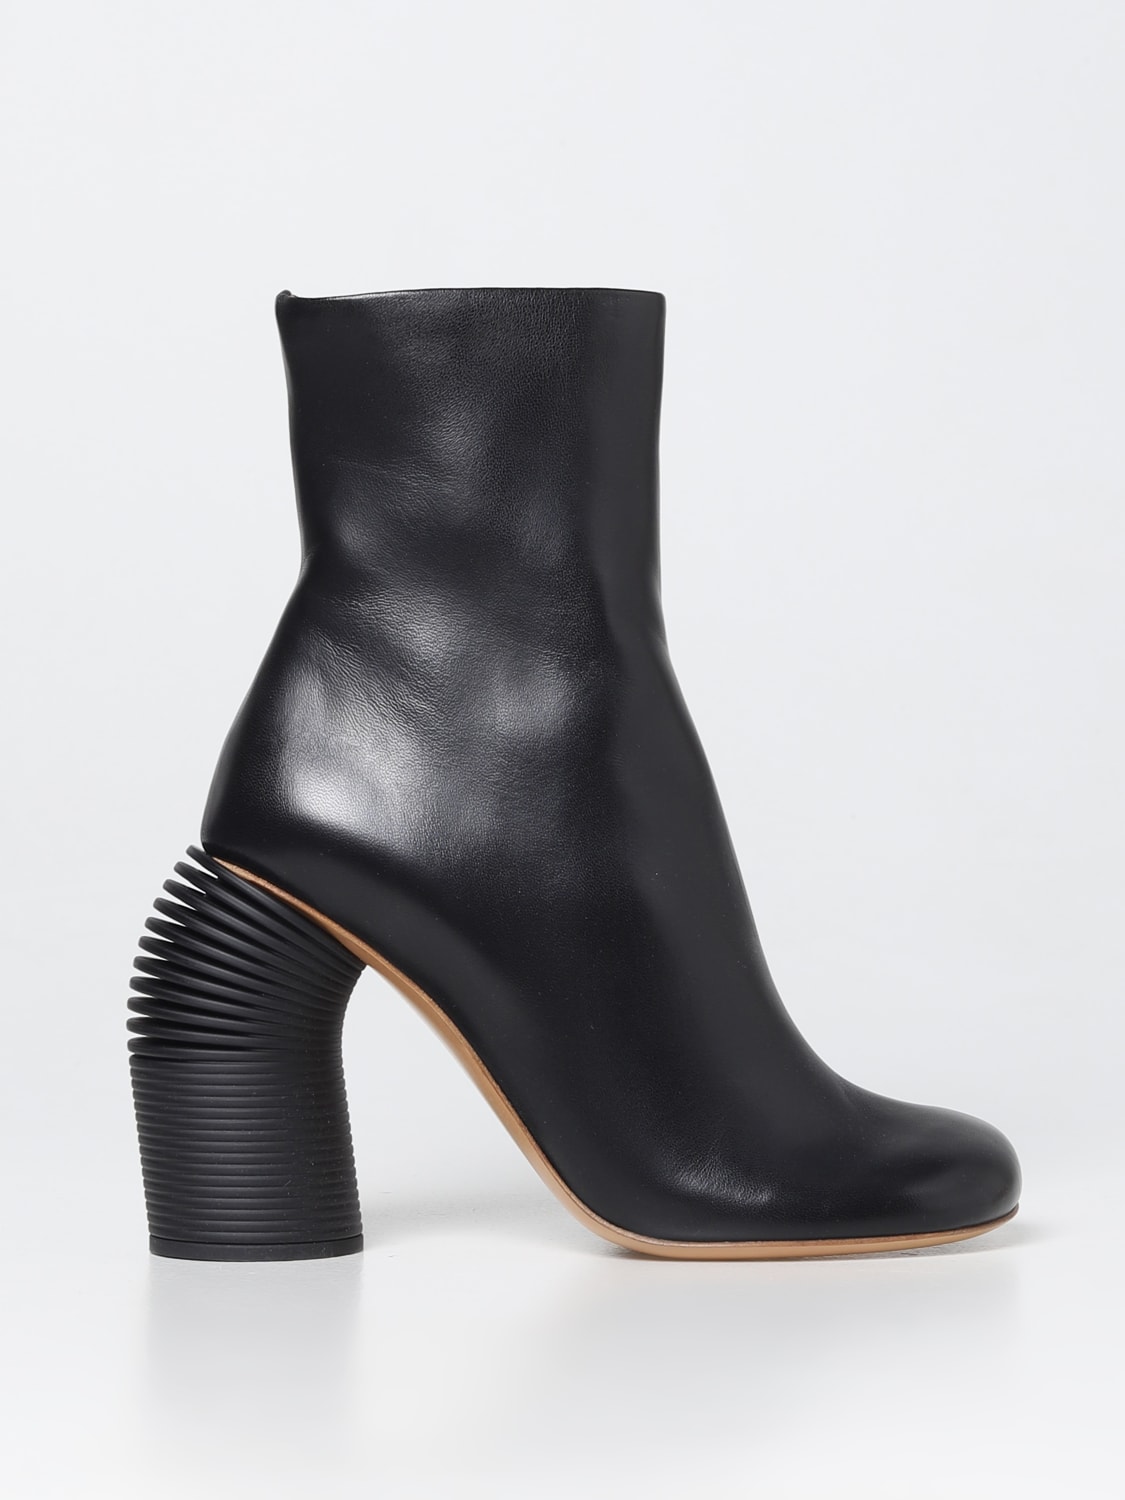 OFF-WHITE: Tonal Spring leather ankle boots - Black | Off-White flat ...